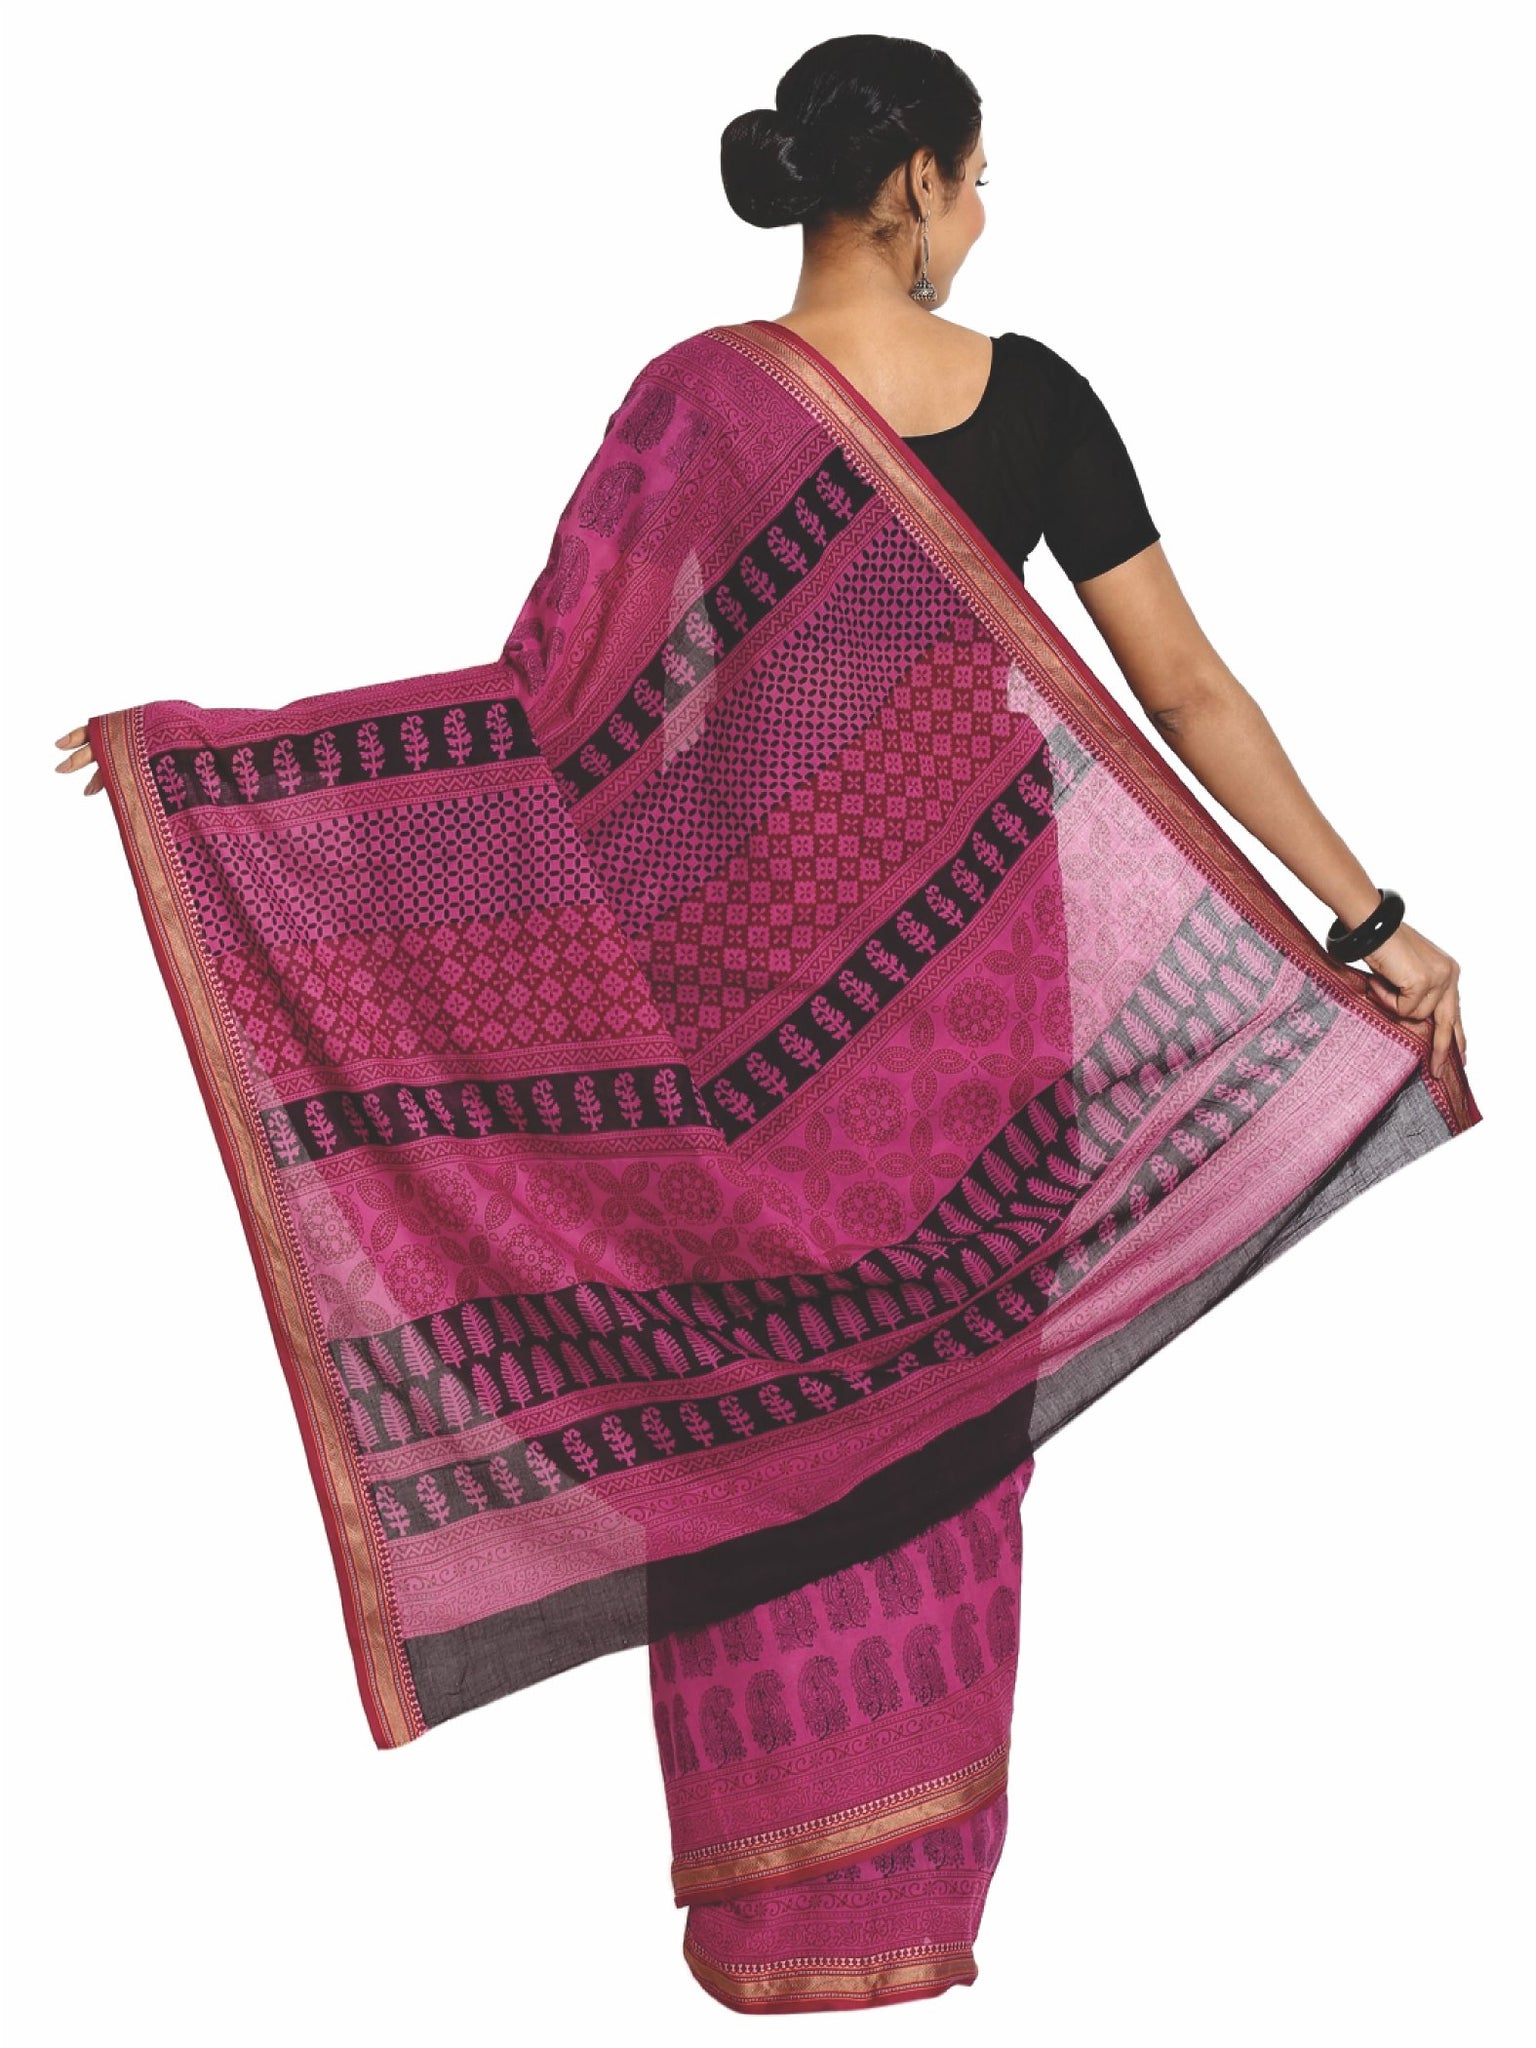 Pink Cotton Hand Block Bagh Print Handcrafted Saree-Saree-Kalakari India-ZIBASA0082-Bagh, Cotton, Geographical Indication, Hand Blocks, Hand Crafted, Heritage Prints, Natural Dyes, Sarees, Sustainable Fabrics-[Linen,Ethnic,wear,Fashionista,Handloom,Handicraft,Indigo,blockprint,block,print,Cotton,Chanderi,Blue, latest,classy,party,bollywood,trendy,summer,style,traditional,formal,elegant,unique,style,hand,block,print, dabu,booti,gift,present,glamorous,affordable,collectible,Sari,Saree,printed, hol